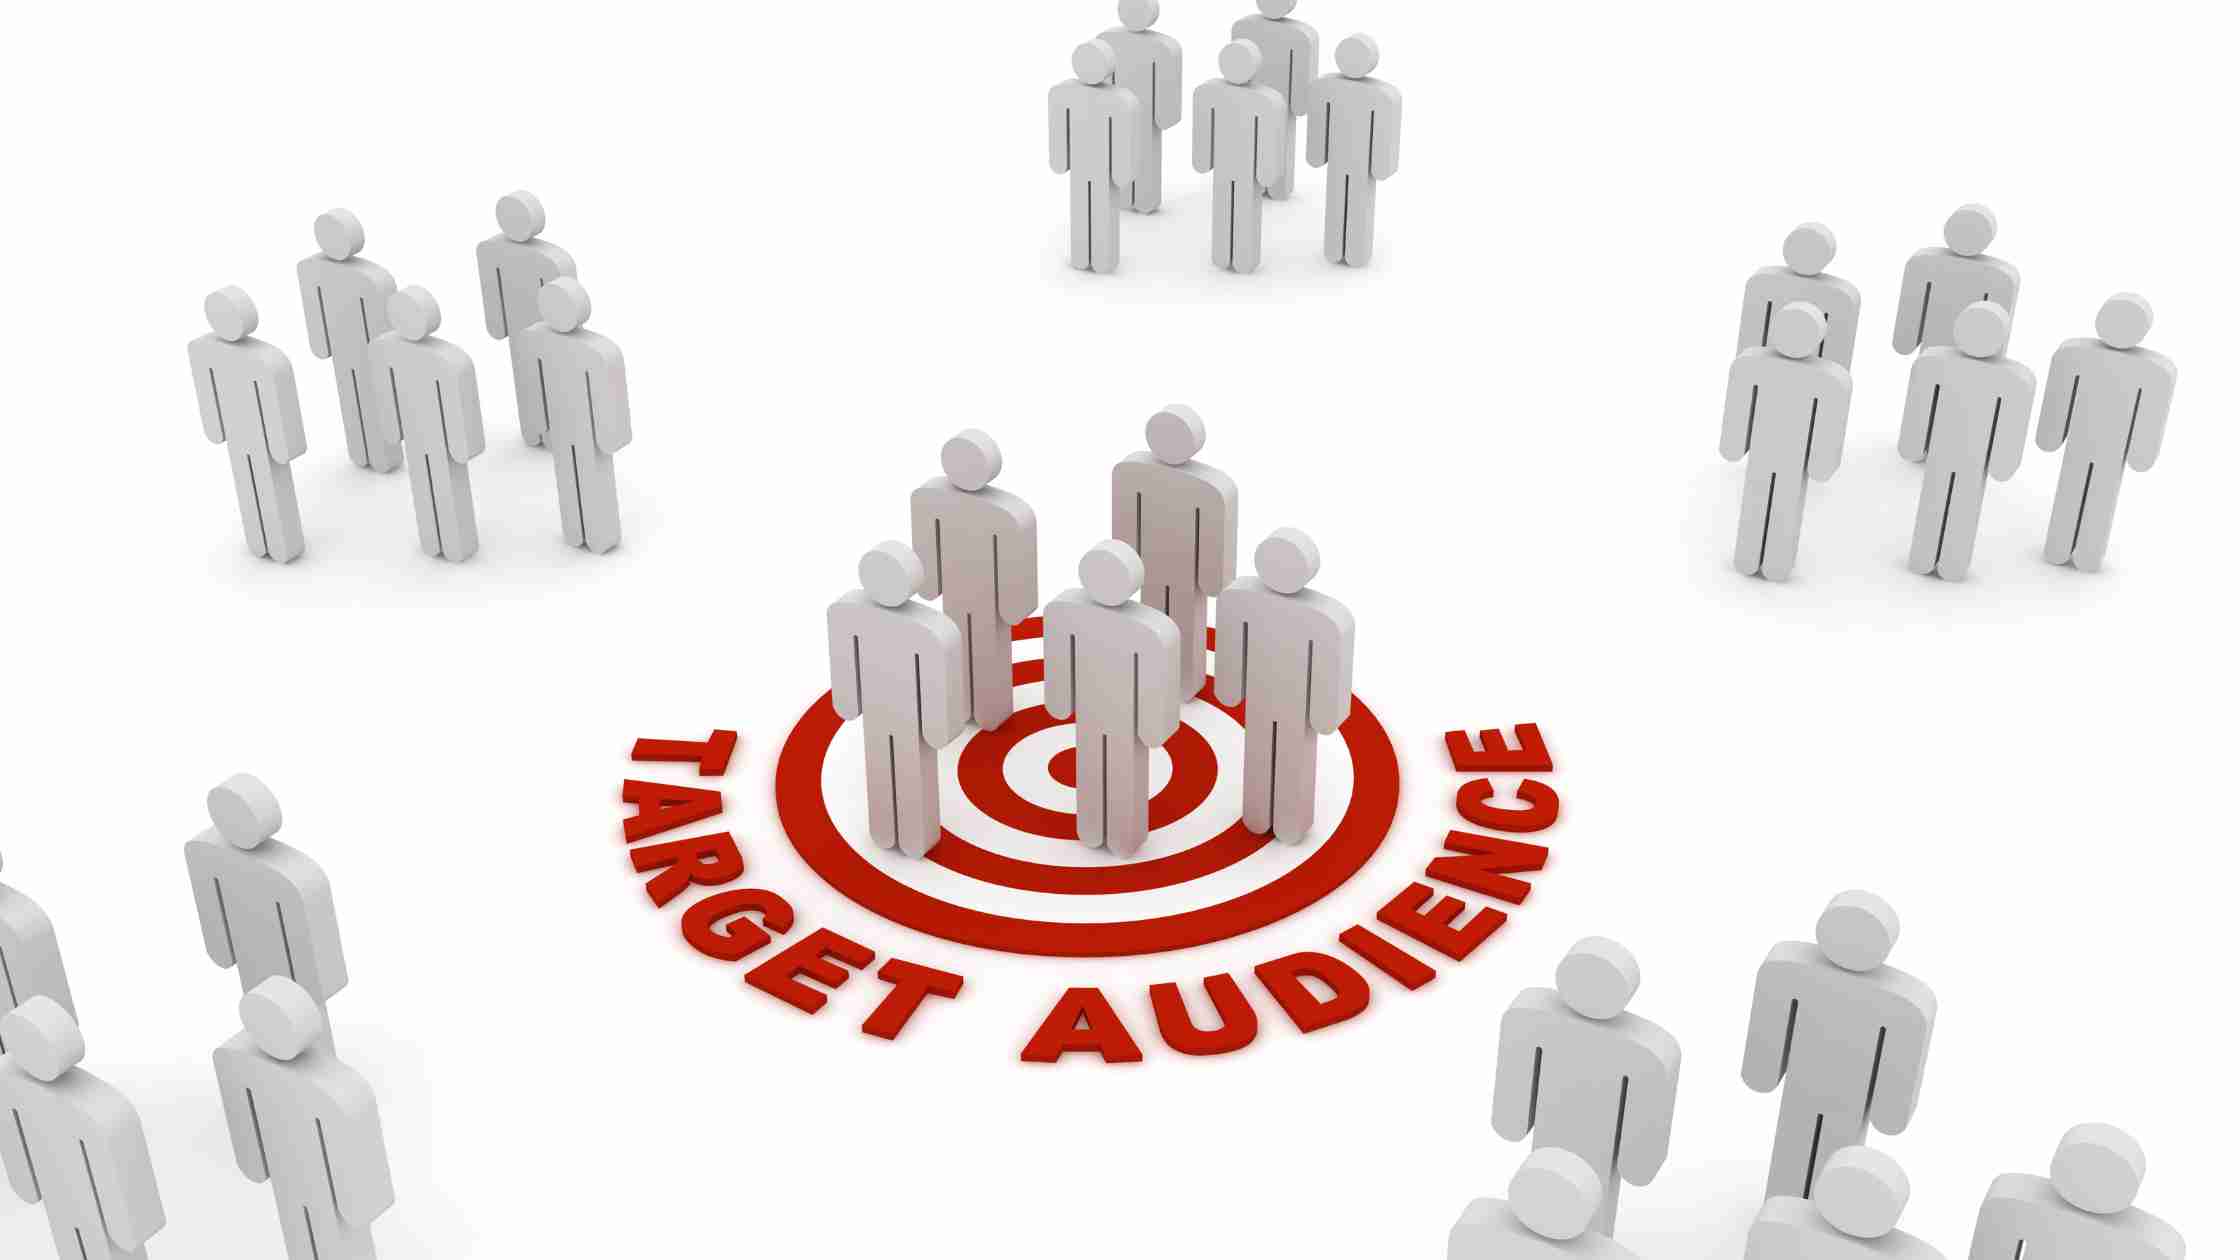 Identify the audience you want to reach